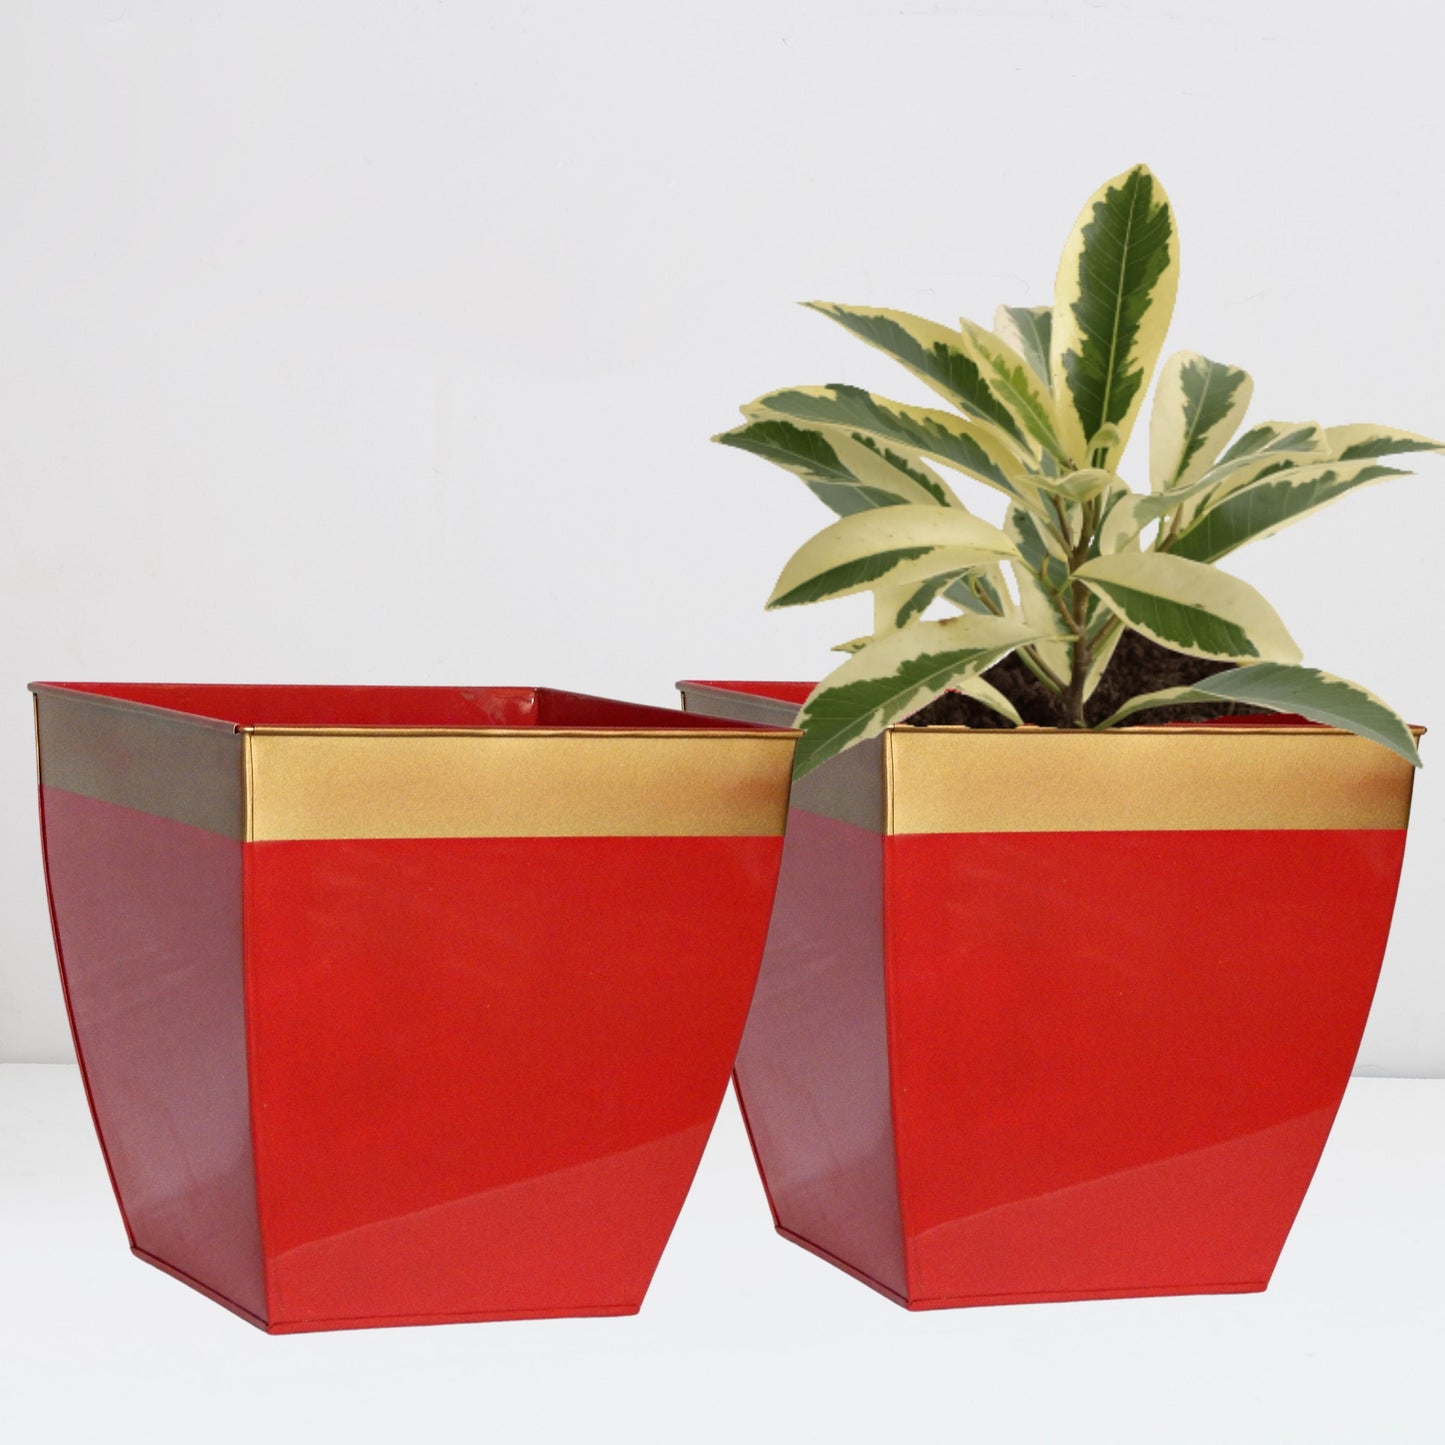 Midland 8” Red Tapered Planter